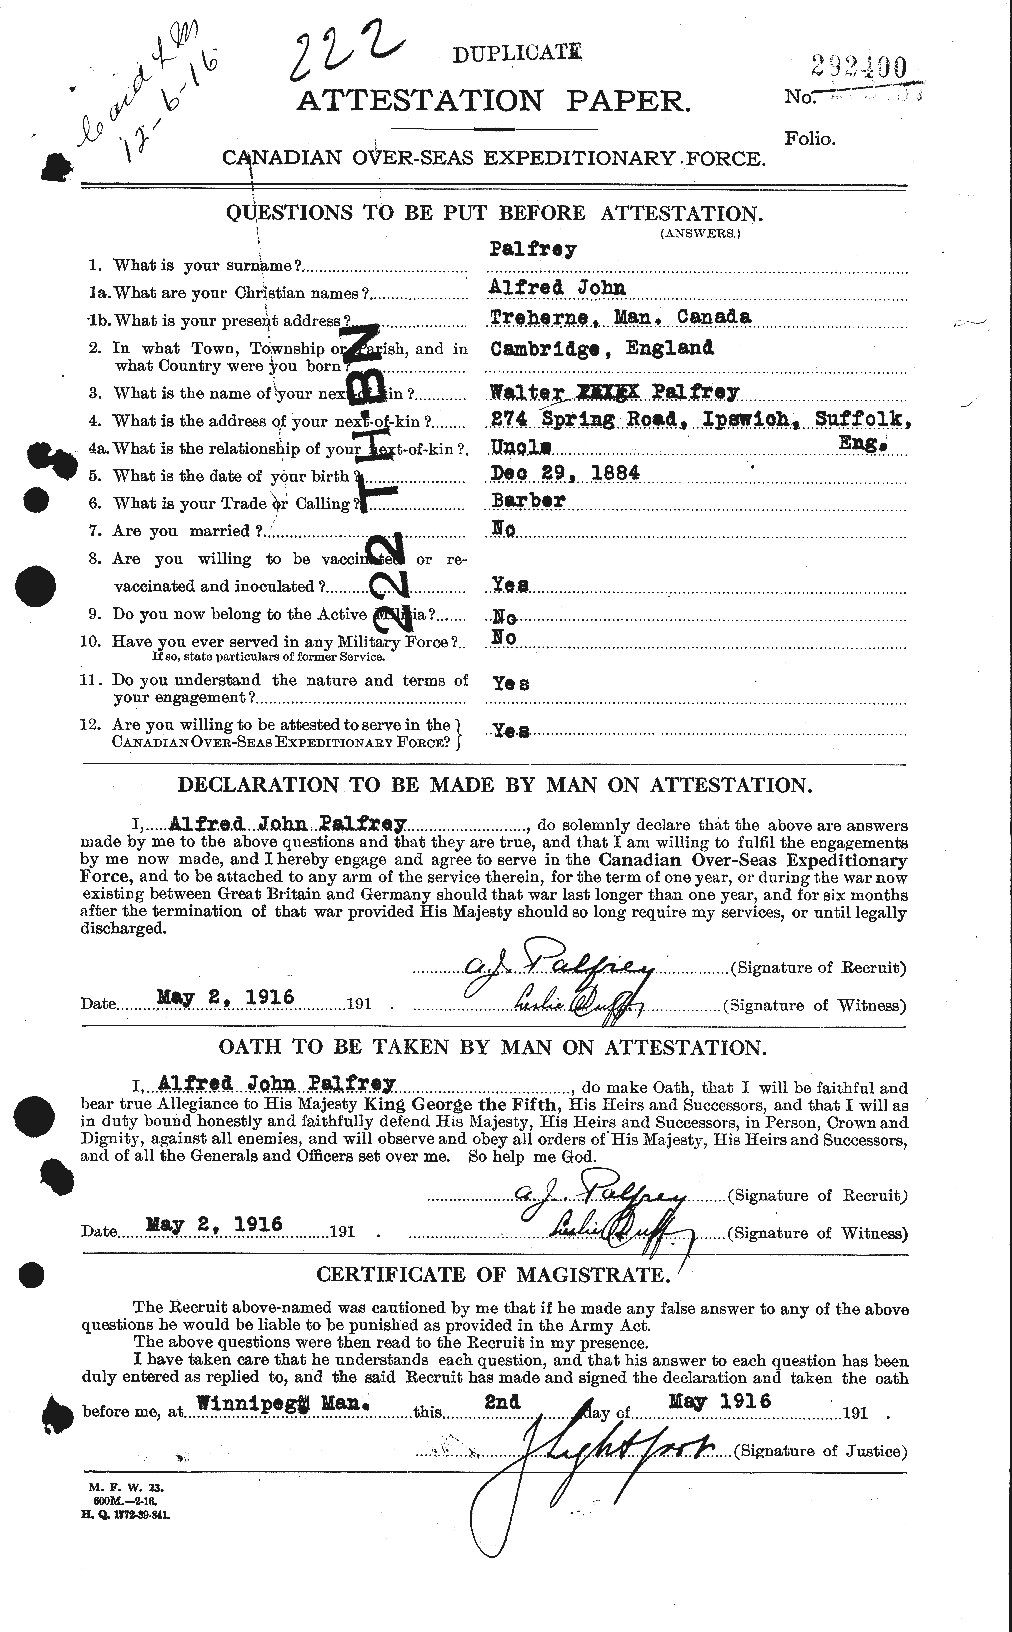 Personnel Records of the First World War - CEF 562627a